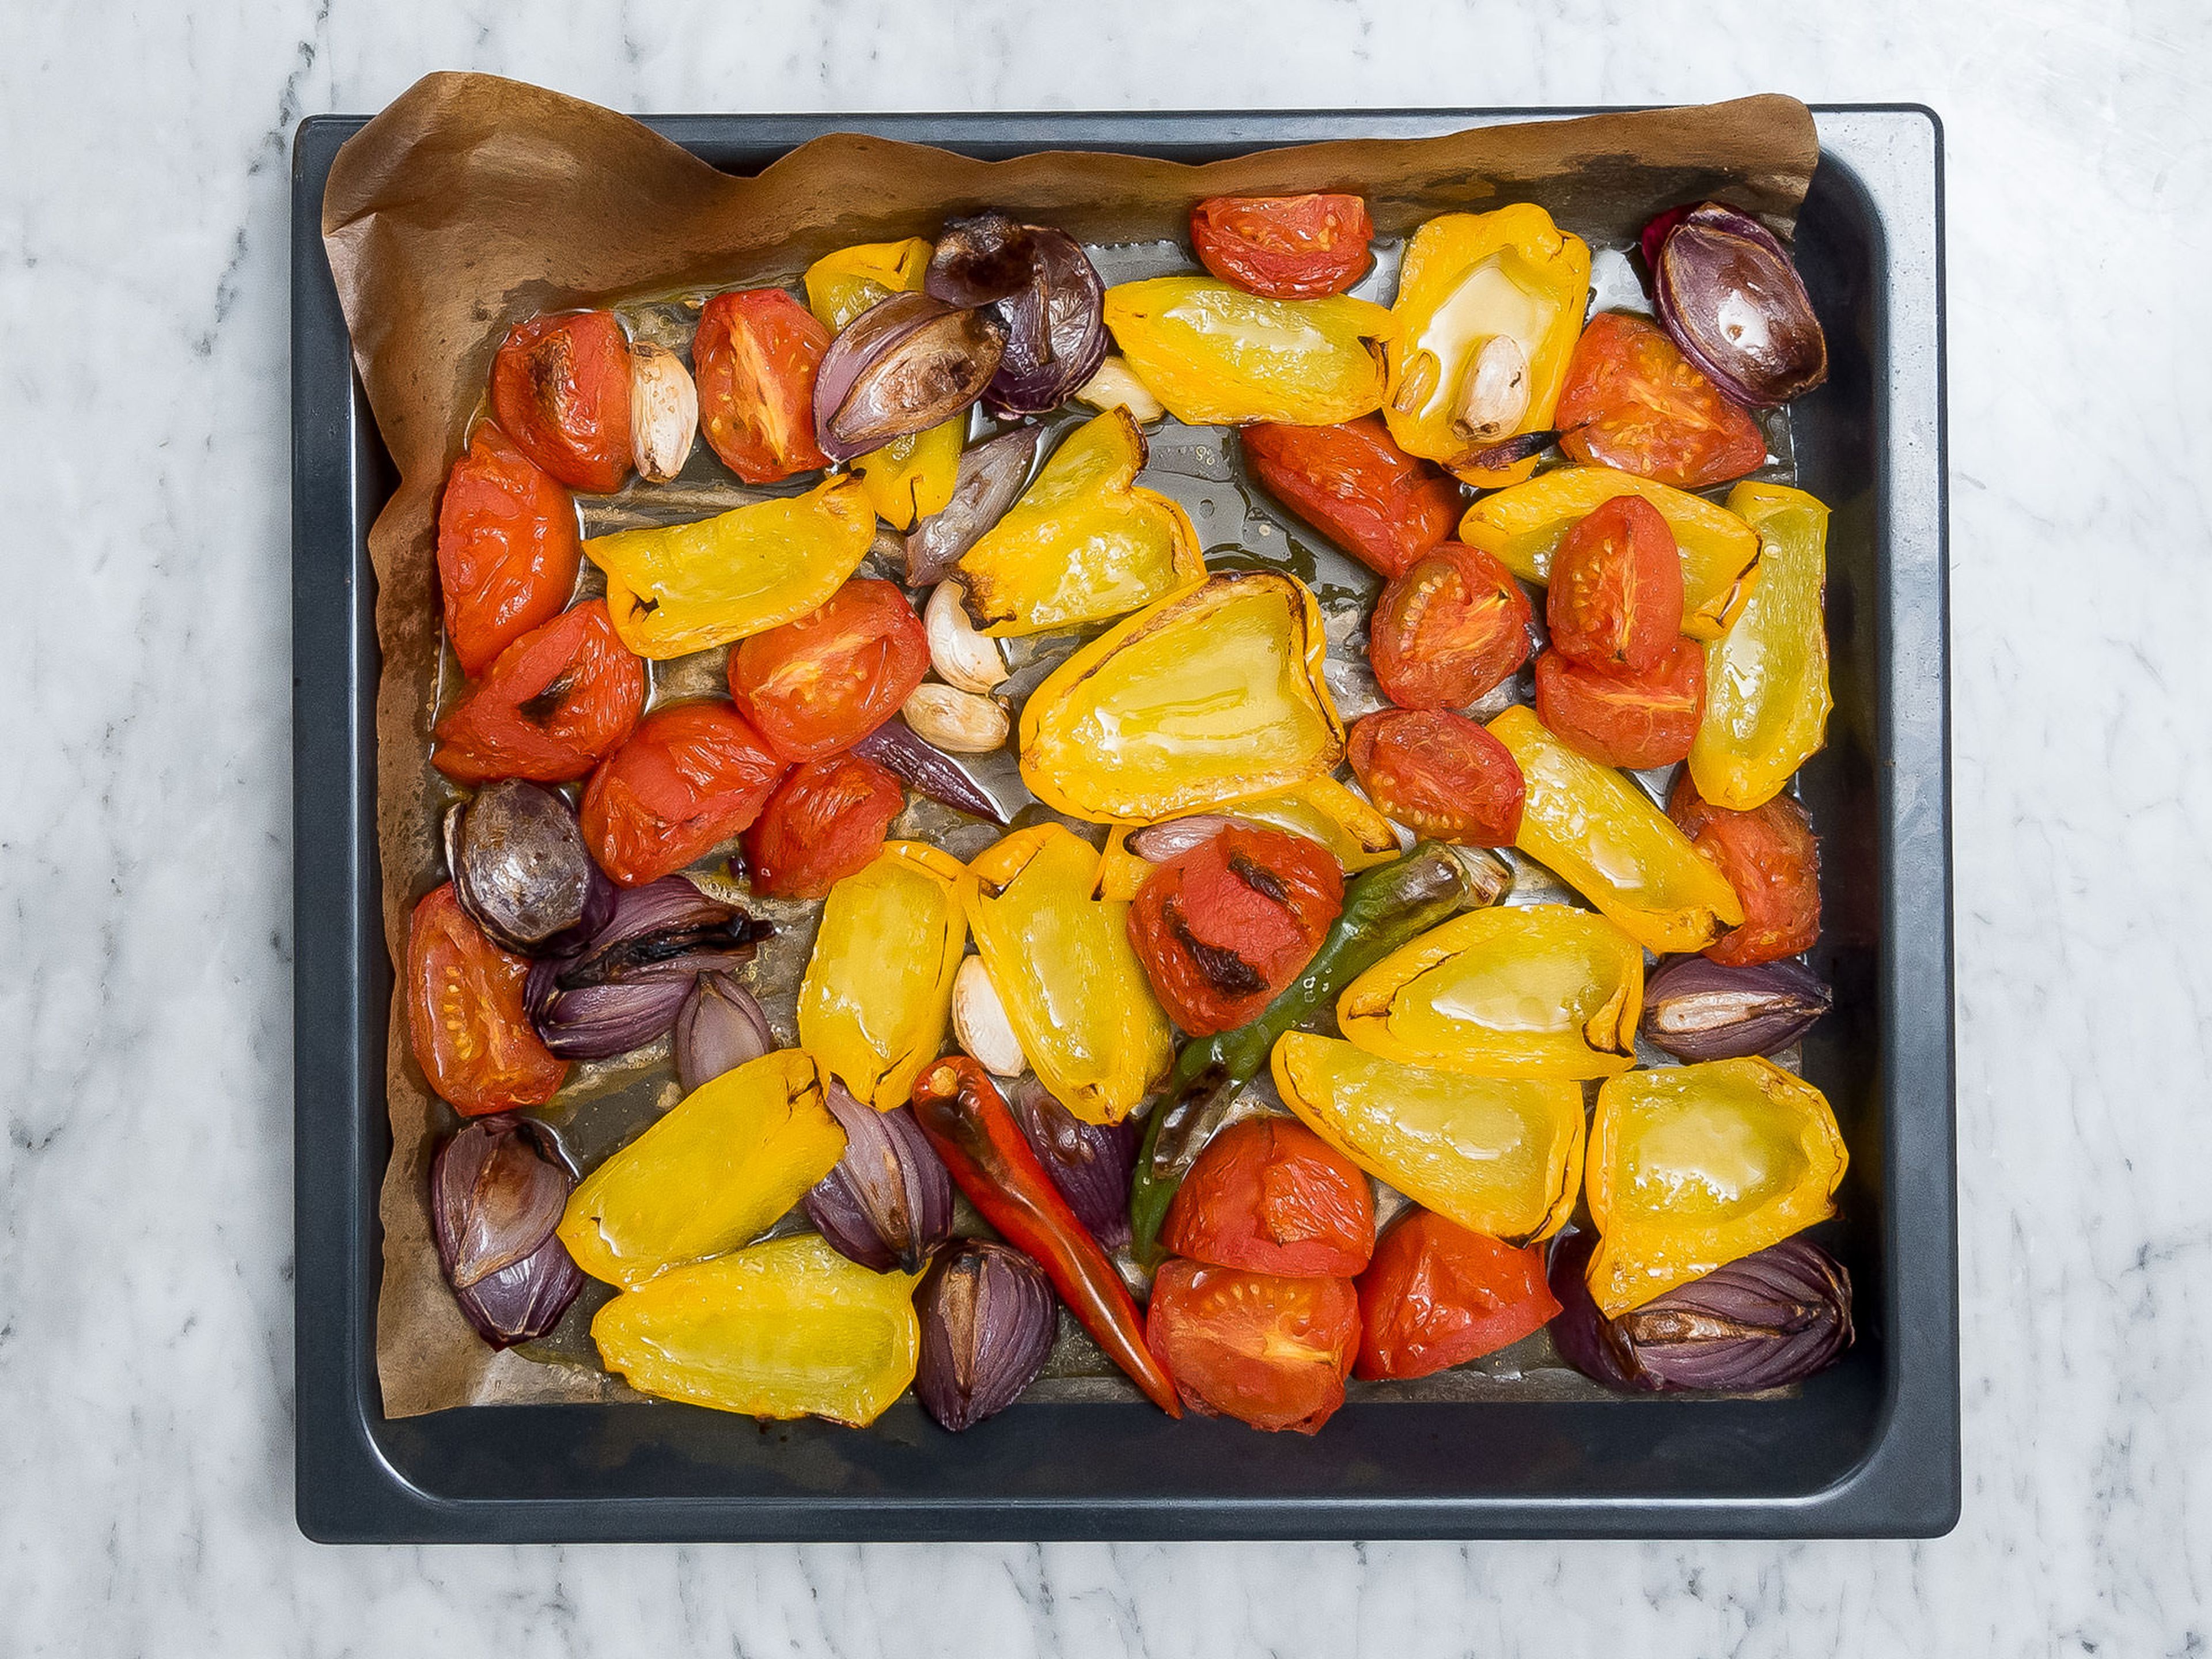 Transfer sliced vegetables together with the garlic and chili peppers to a parchment-lined baking sheet and bake in oven at 240°C/460°F, using the grill function, for approx. 15 min. Remove from oven and turn vegetables, make sure to turn the bell peppers skin-side up. Place back into the oven and bake for approx. 15 – 20 min. more, or until vegetables turn slightly brown. Remove from oven.